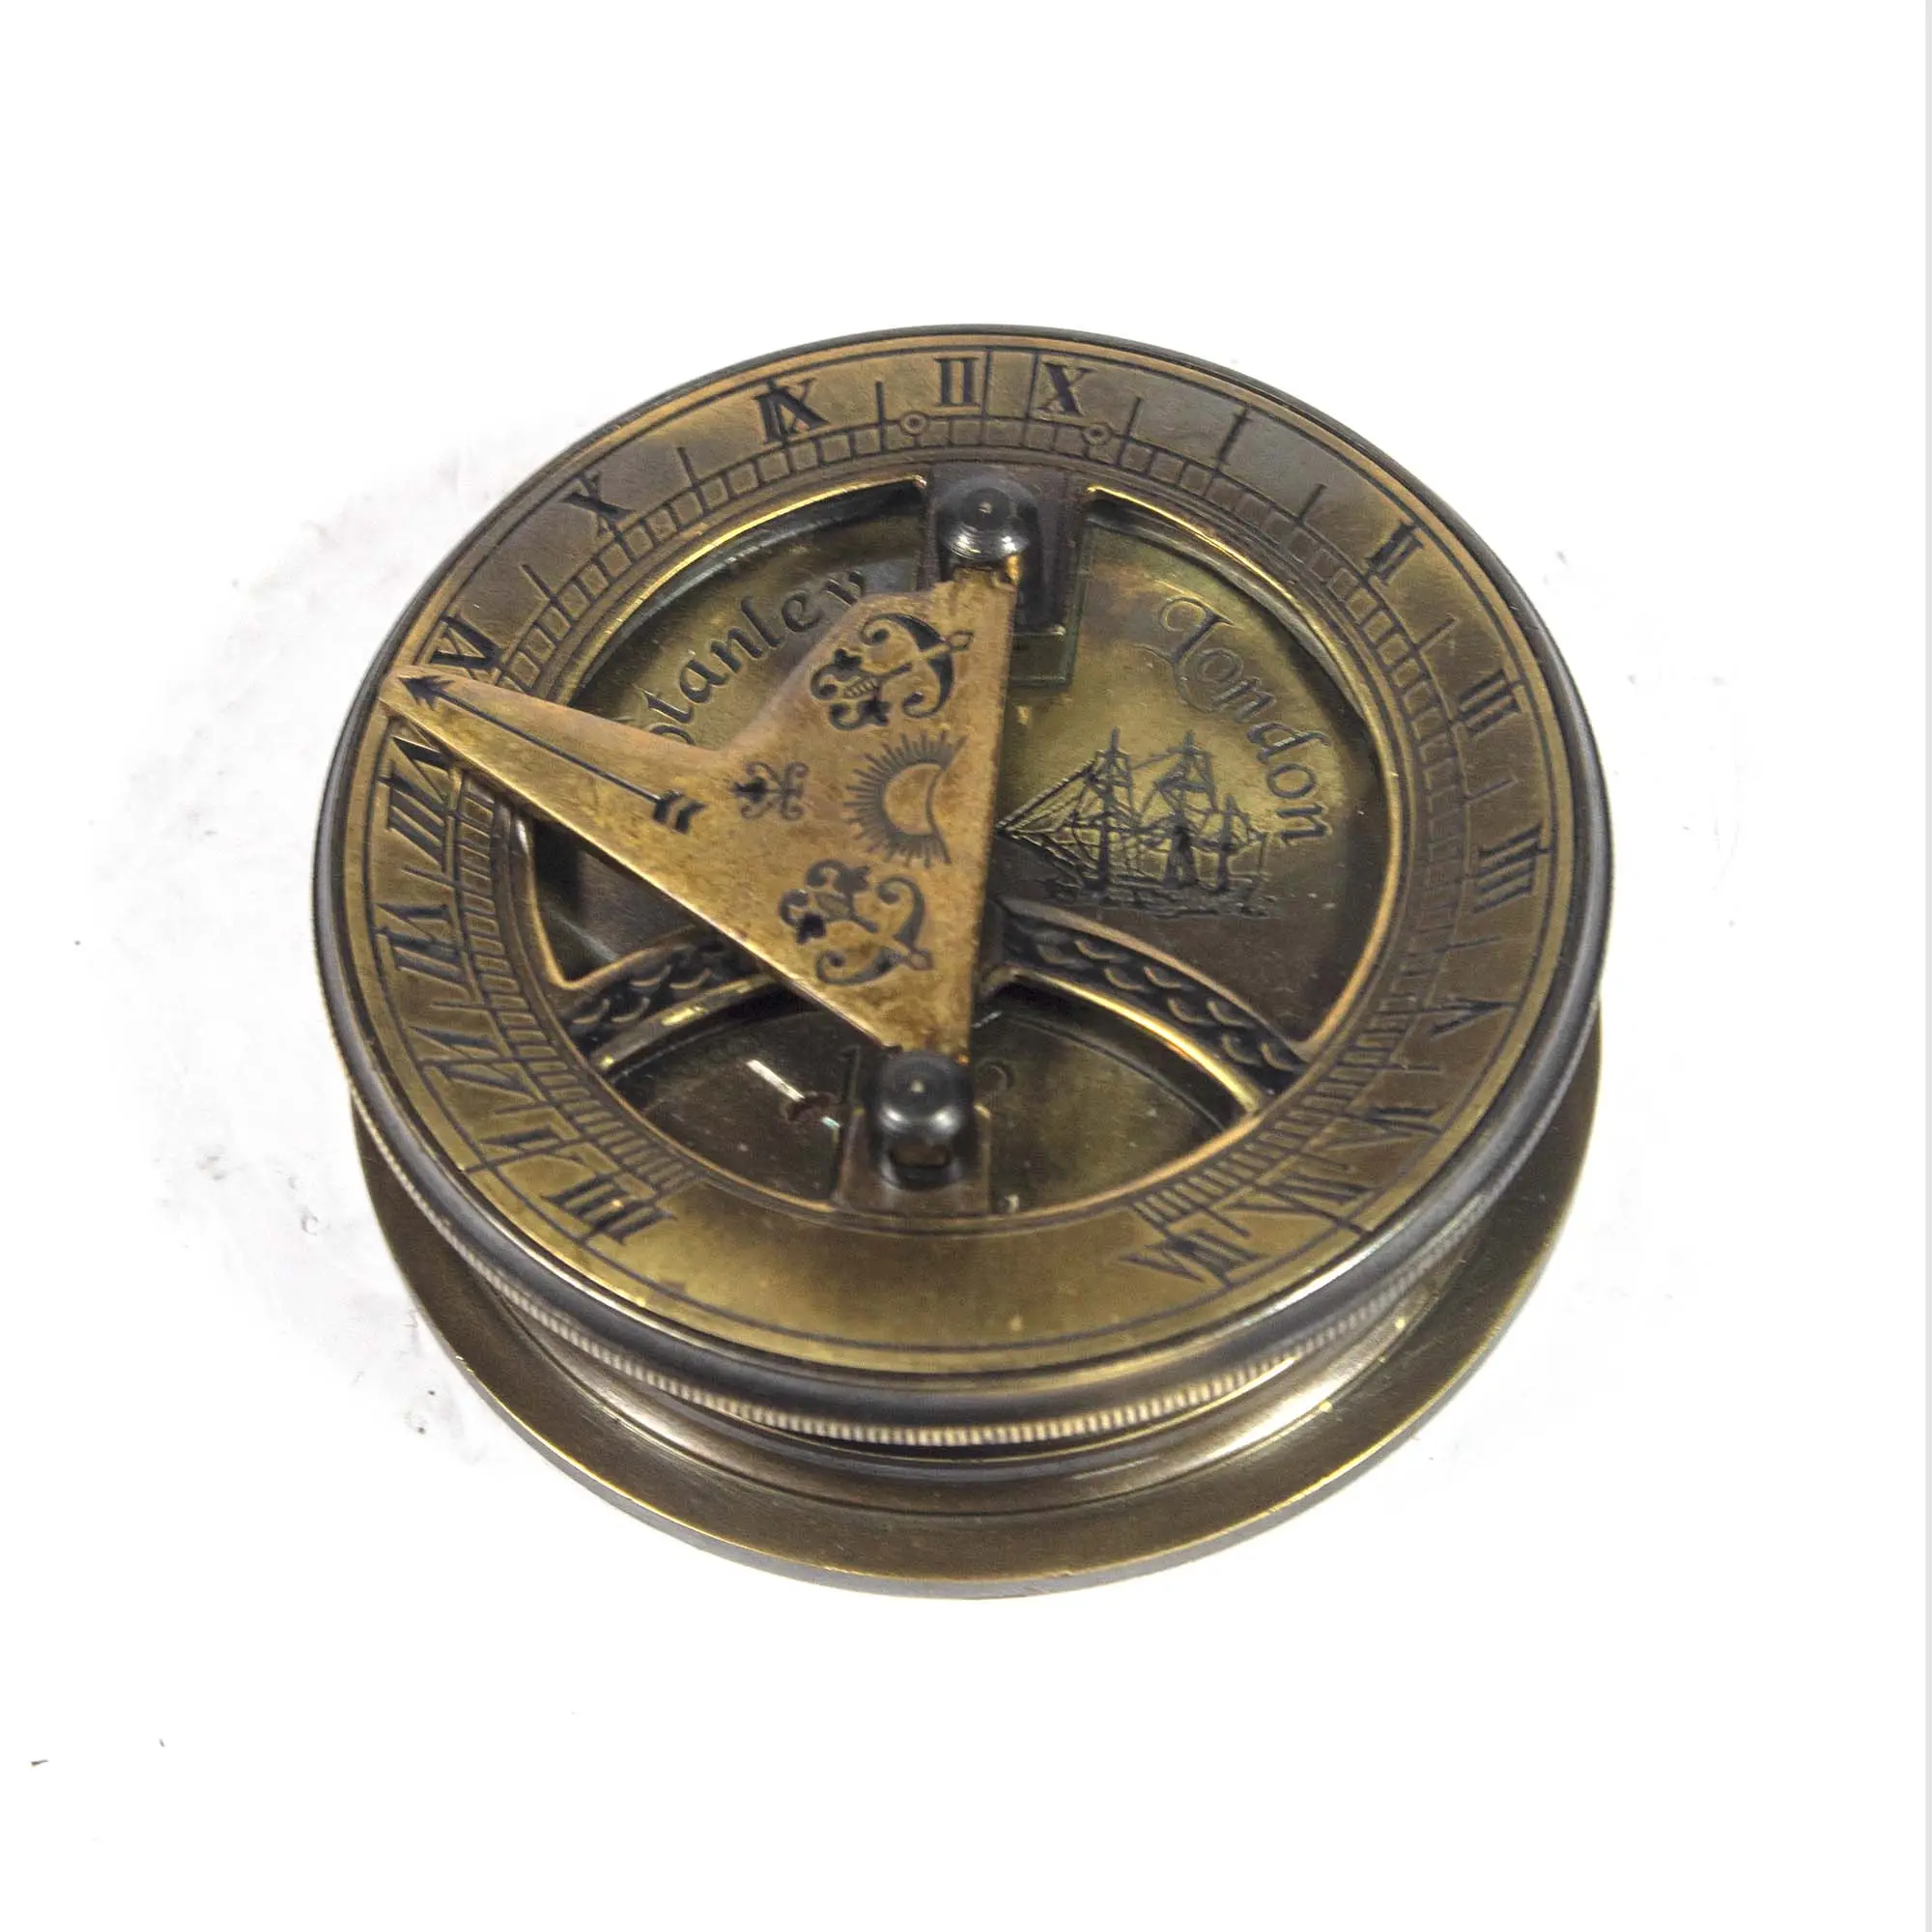 Brass sundial compass with wooden box Magnetic Directional Collectible Compass for Field Outdoor Navigational